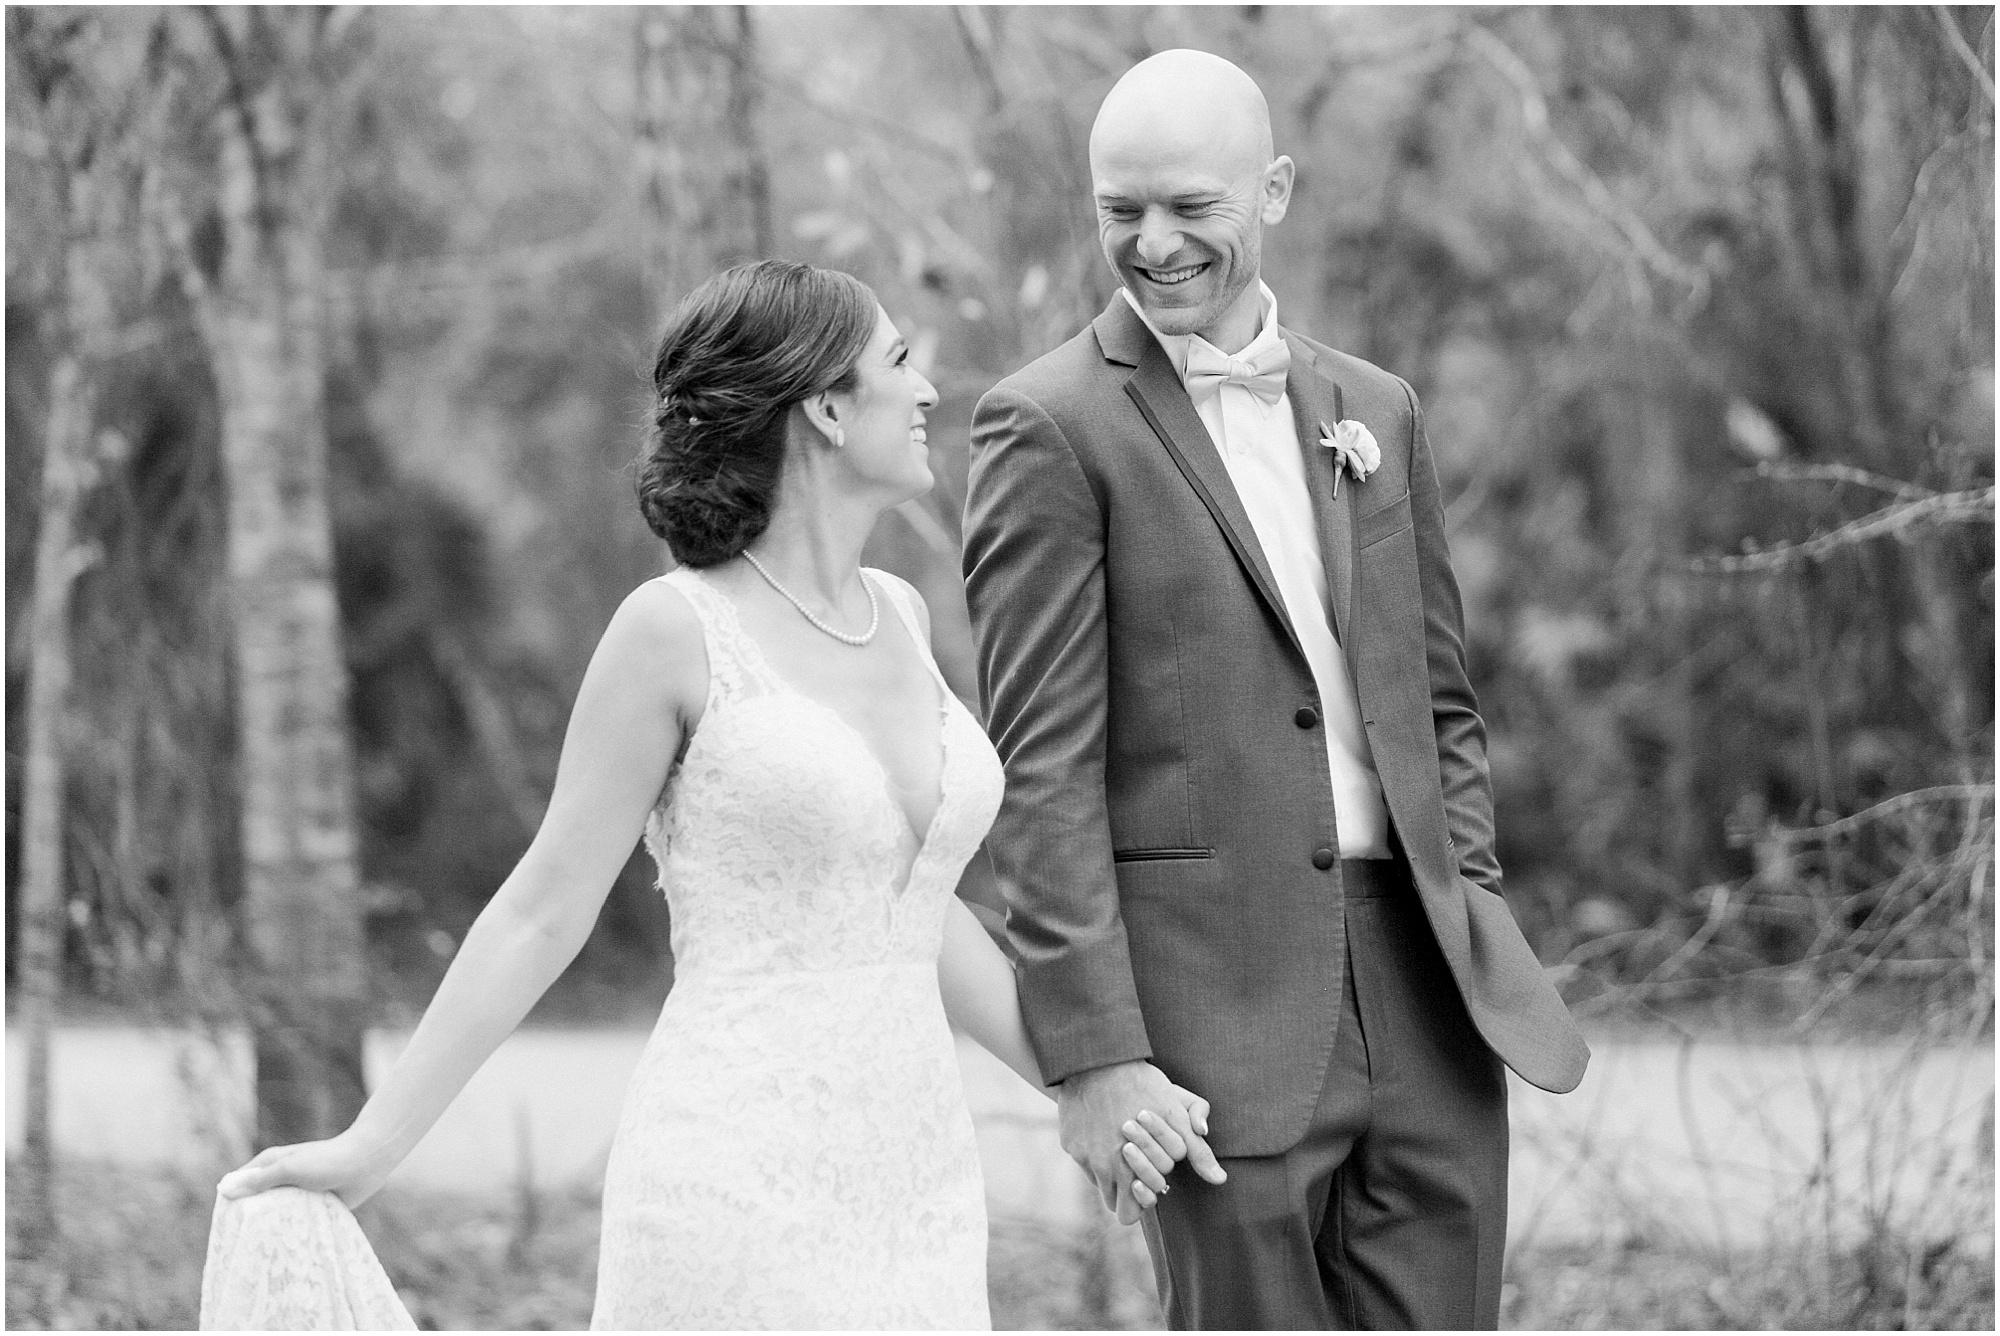 Black and white photo of the bride and groom smiling while walking down the street.